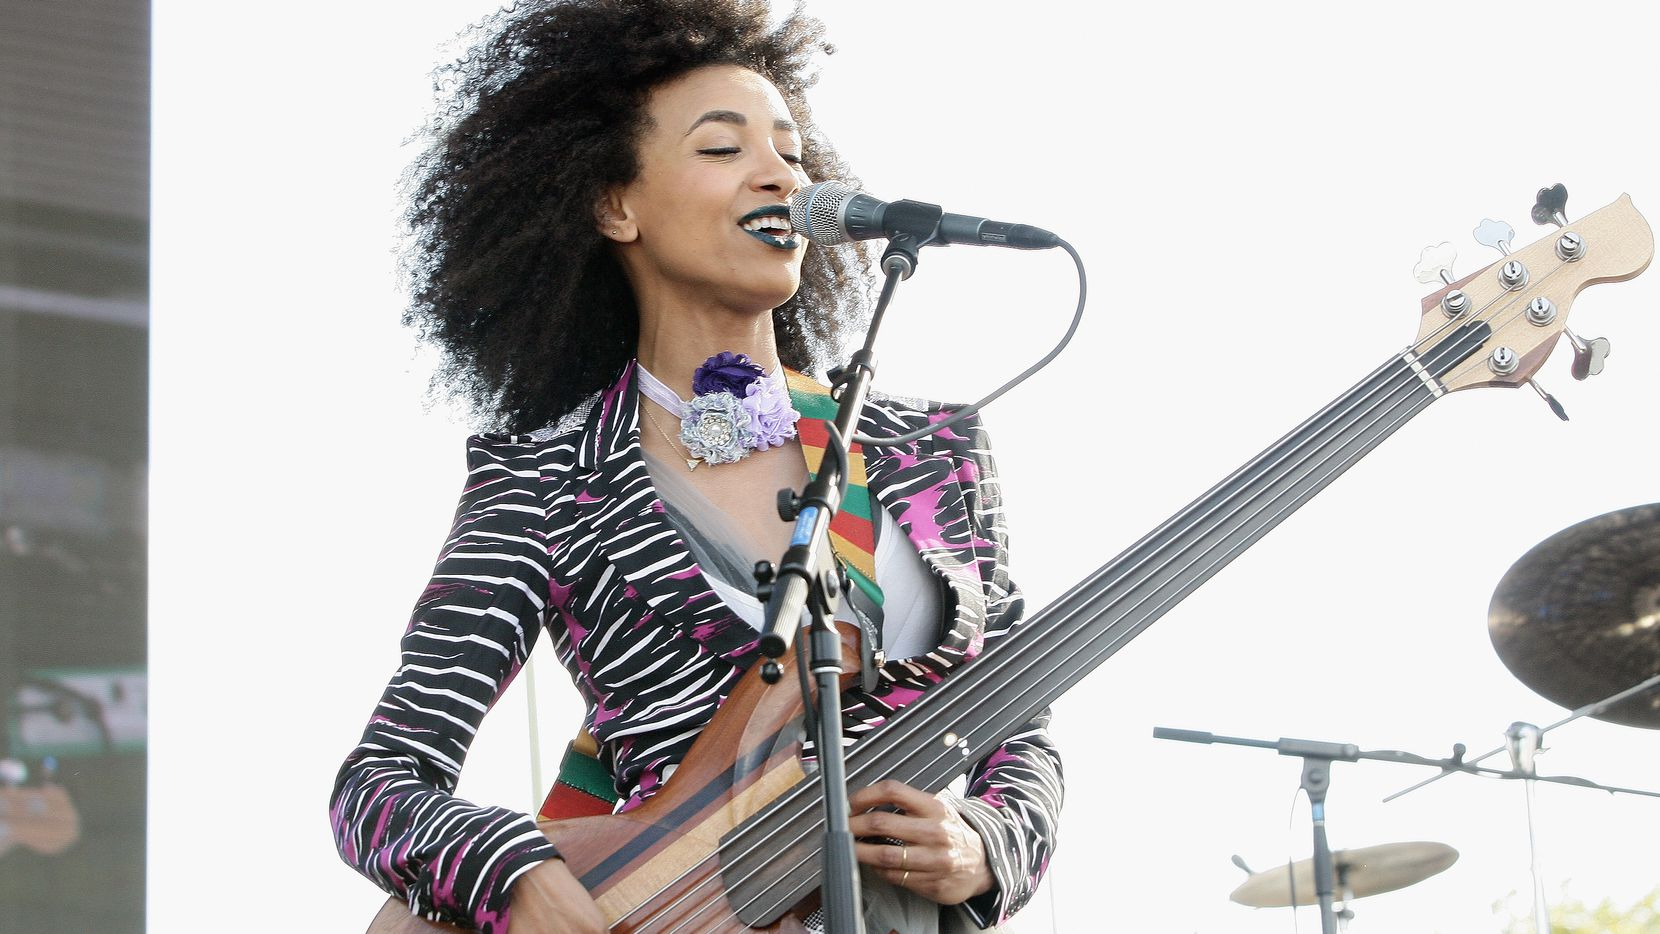 The Best Female Bassists Of All Time Ranked | Return of Rock